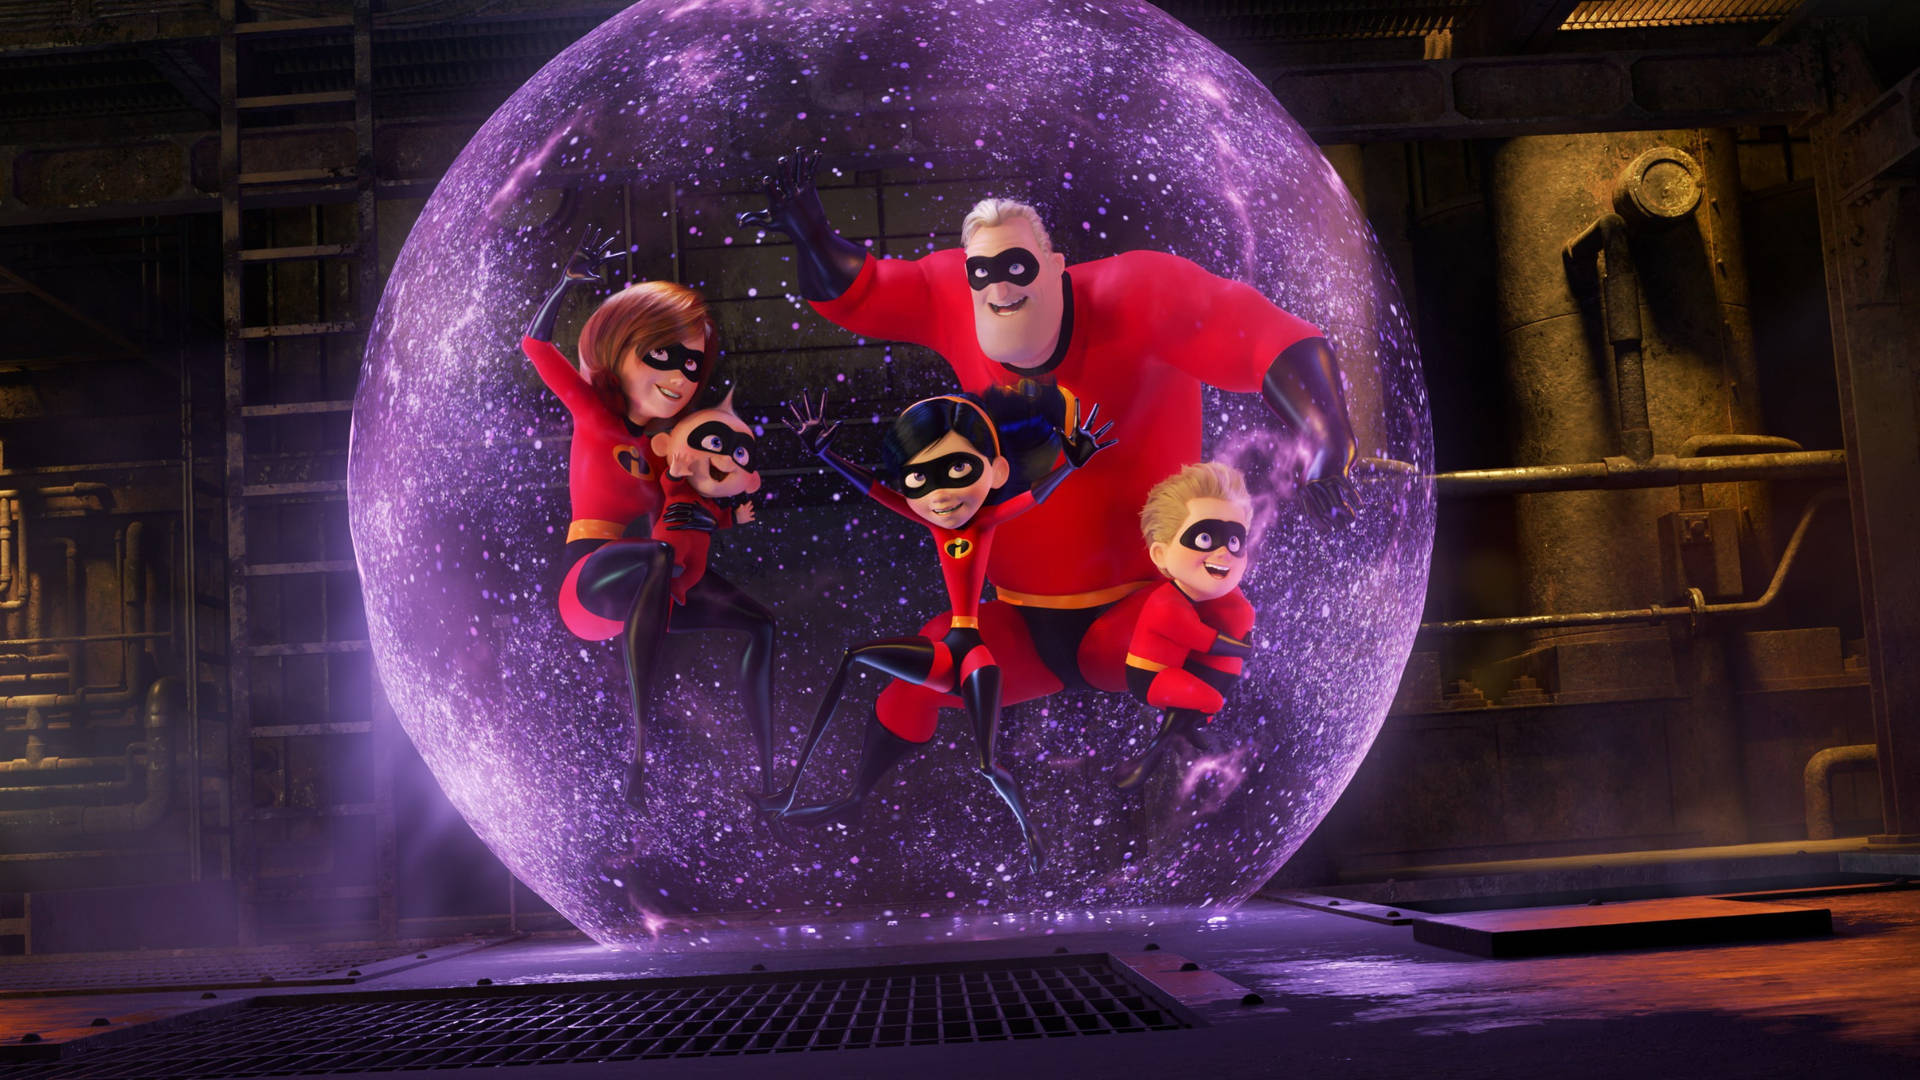 The Incredibles Superhero Movie Background